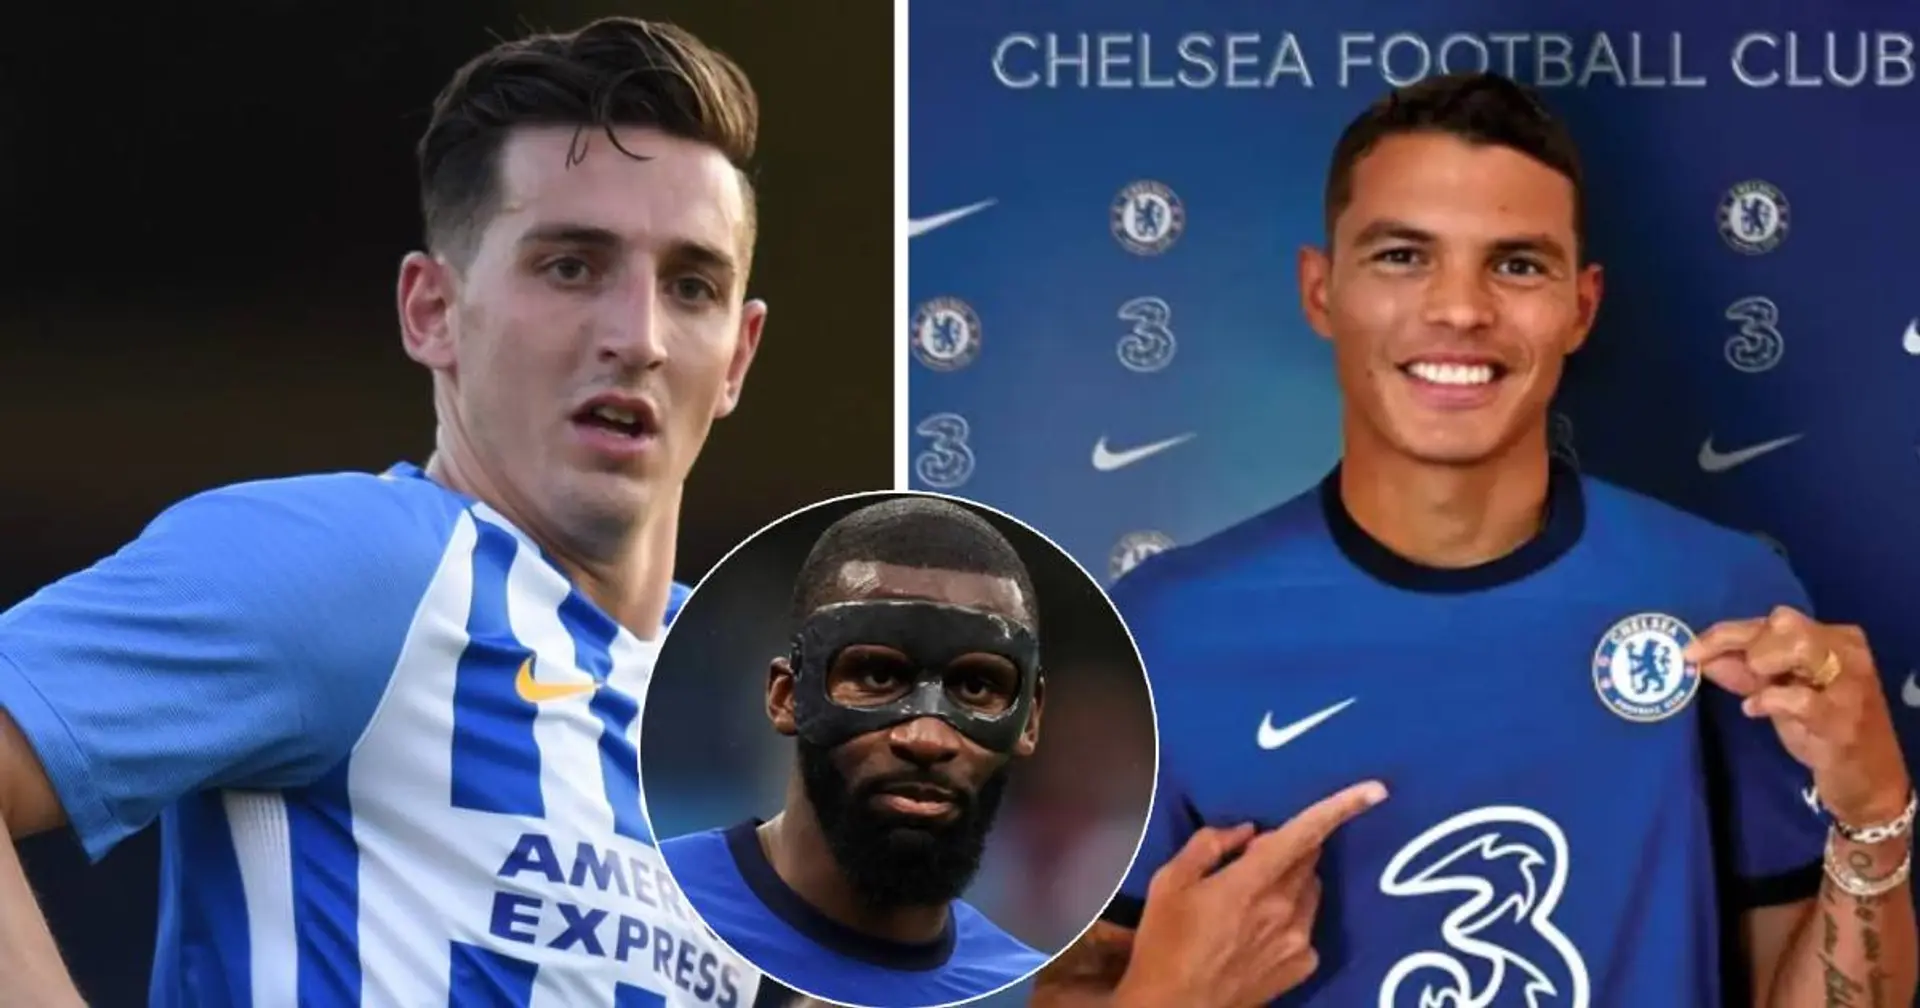 What happened to Chelsea's transfer target that got away during mad 2020 summer spree